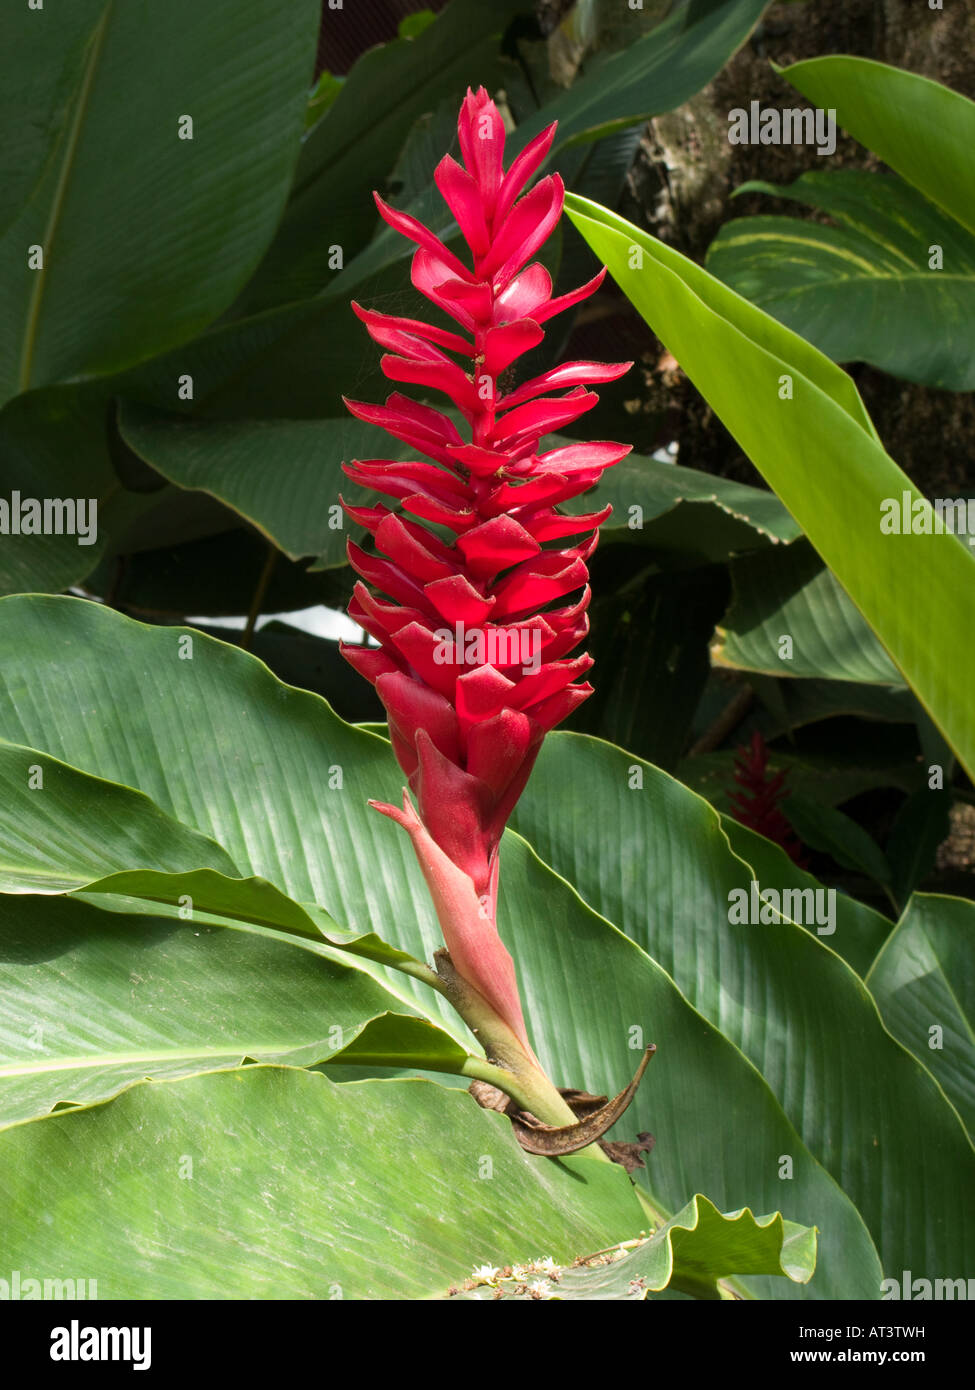 Costa Rica Dominical flora the Ginger Lily red tropical flower Stock Photo